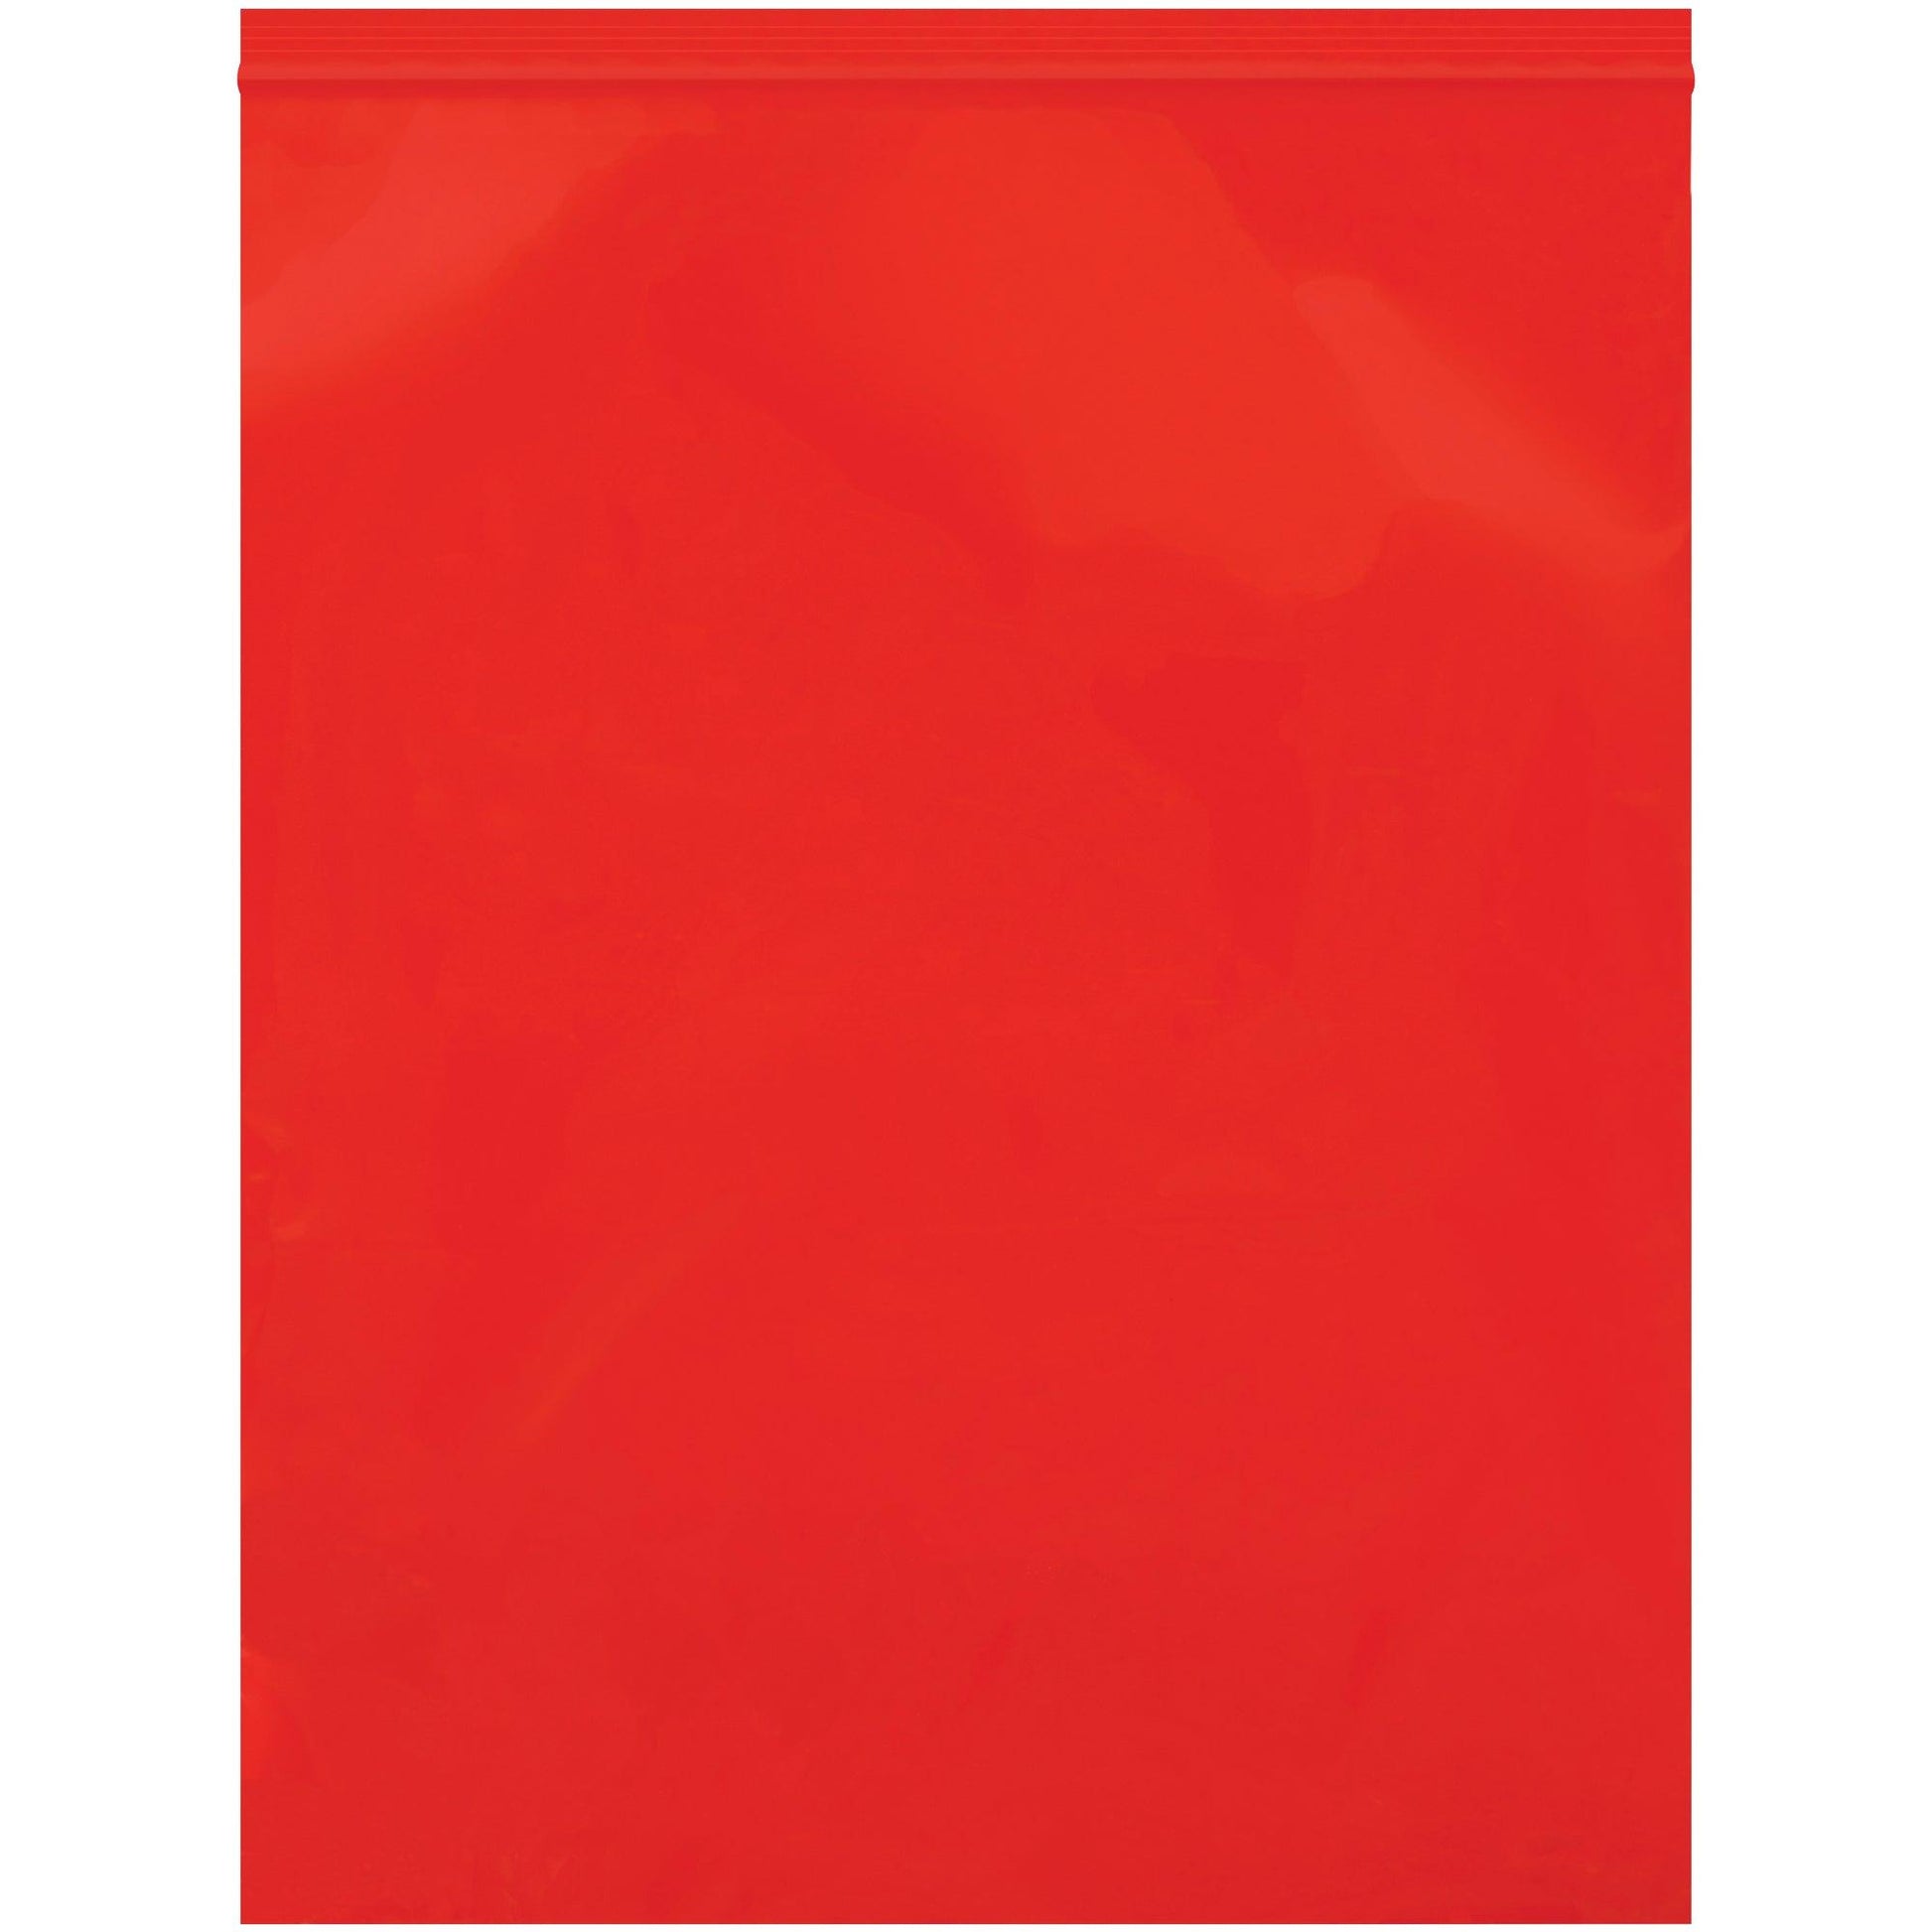 12 x 15" - 2 Mil Red Reclosable Poly Bags - PB3670R